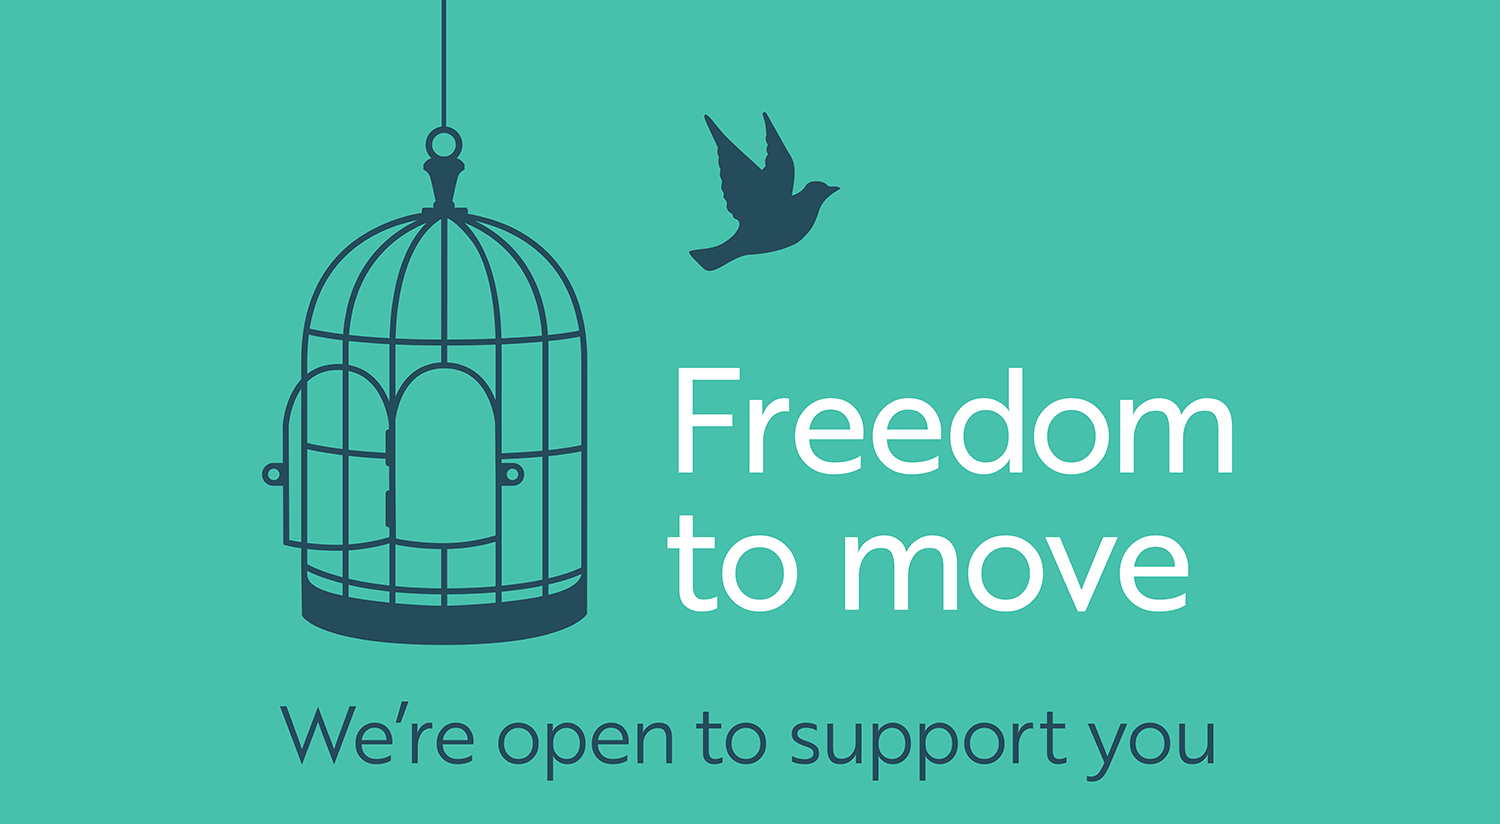 Freedom to move!